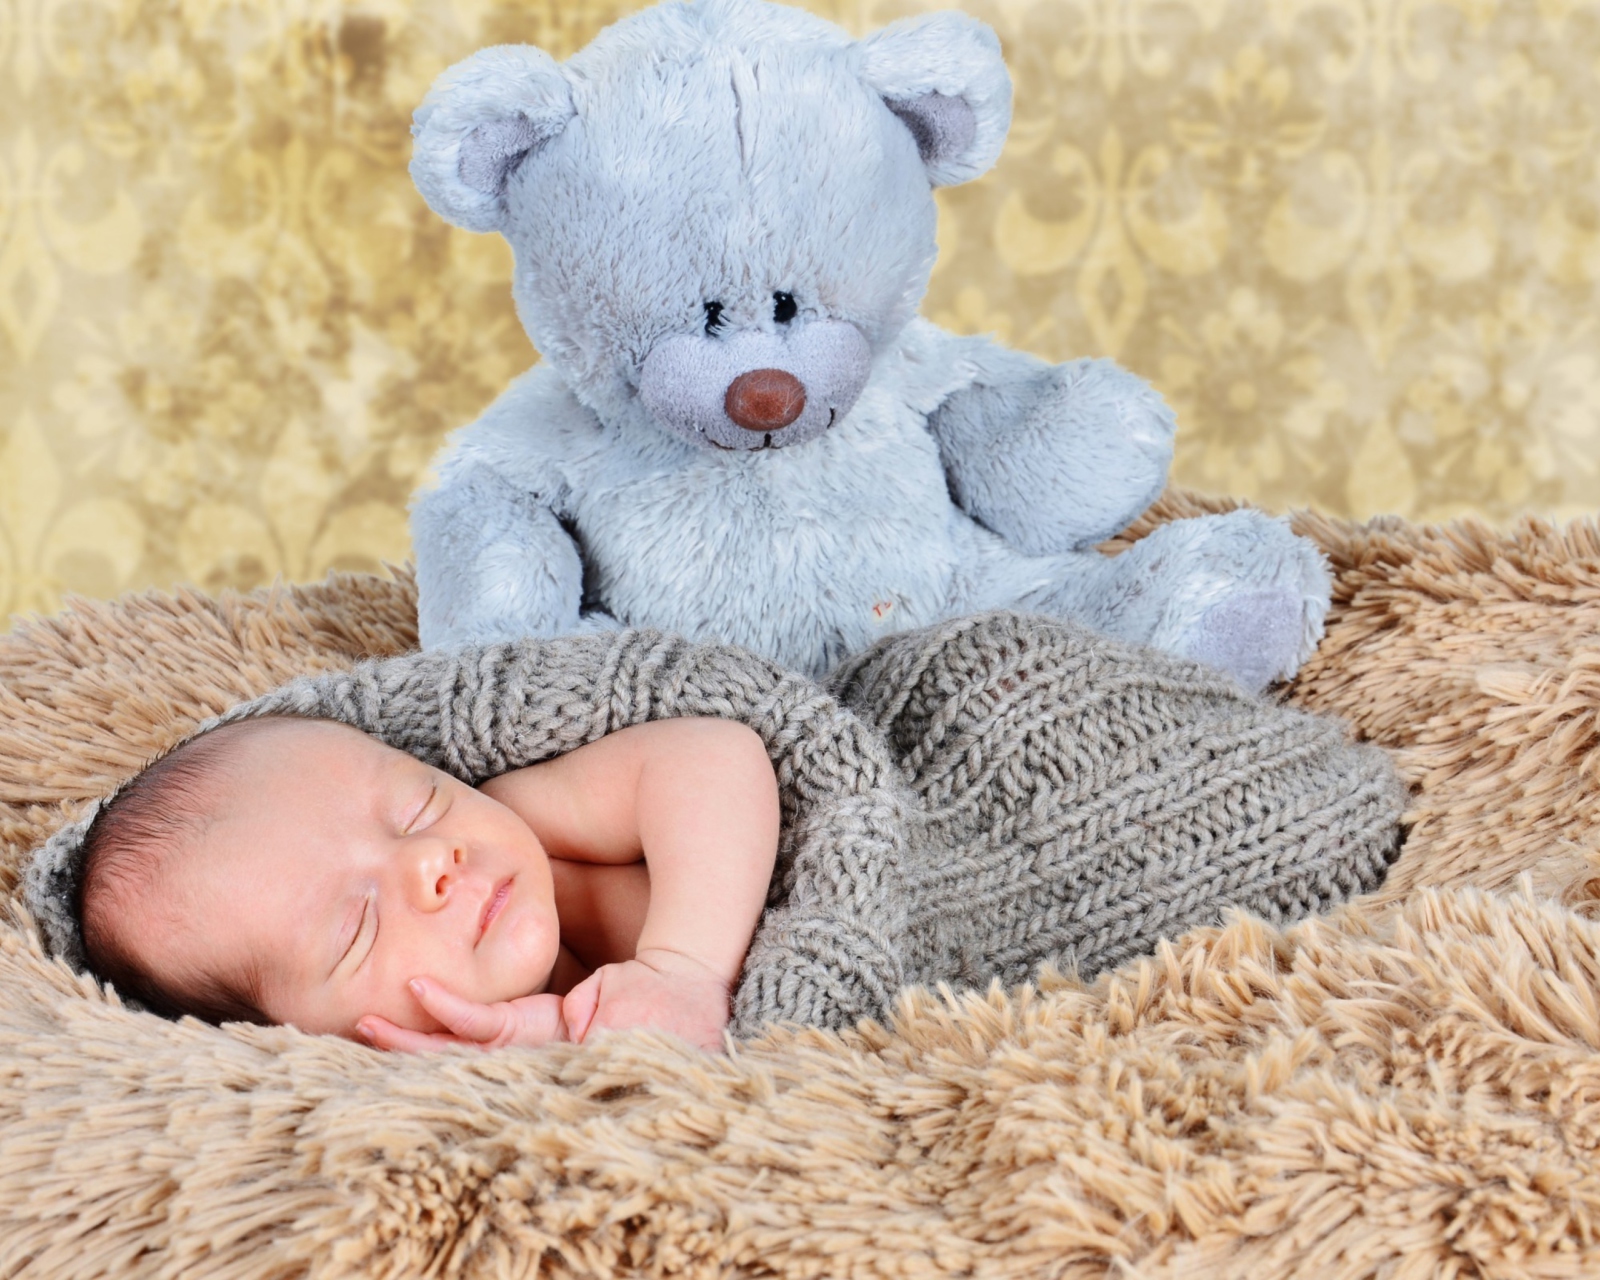 Baby And His Teddy wallpaper 1600x1280